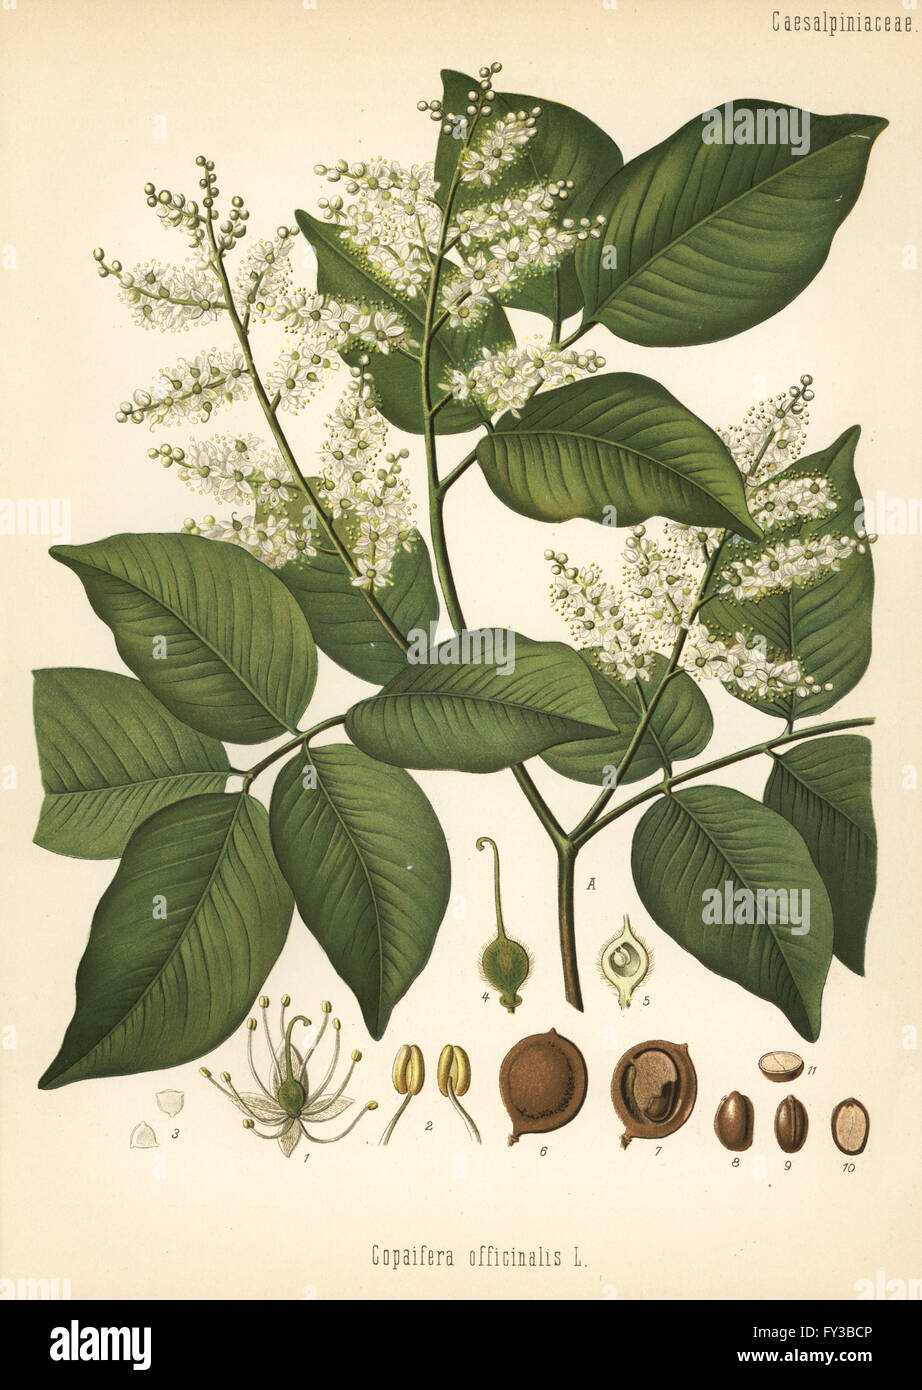 Copaiba, Copaifera officinalis. Chromolithograph after a botanical illustration from Hermann Adolph Koehler's Medicinal Plants, edited by Gustav Pabst, Koehler, Germany, 1887. Stock Photo